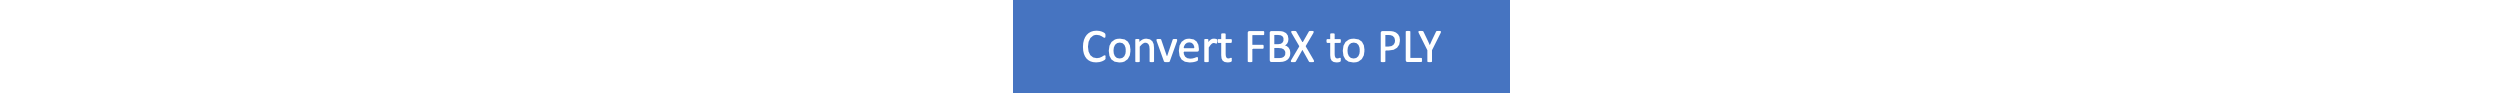 FBX to PLY